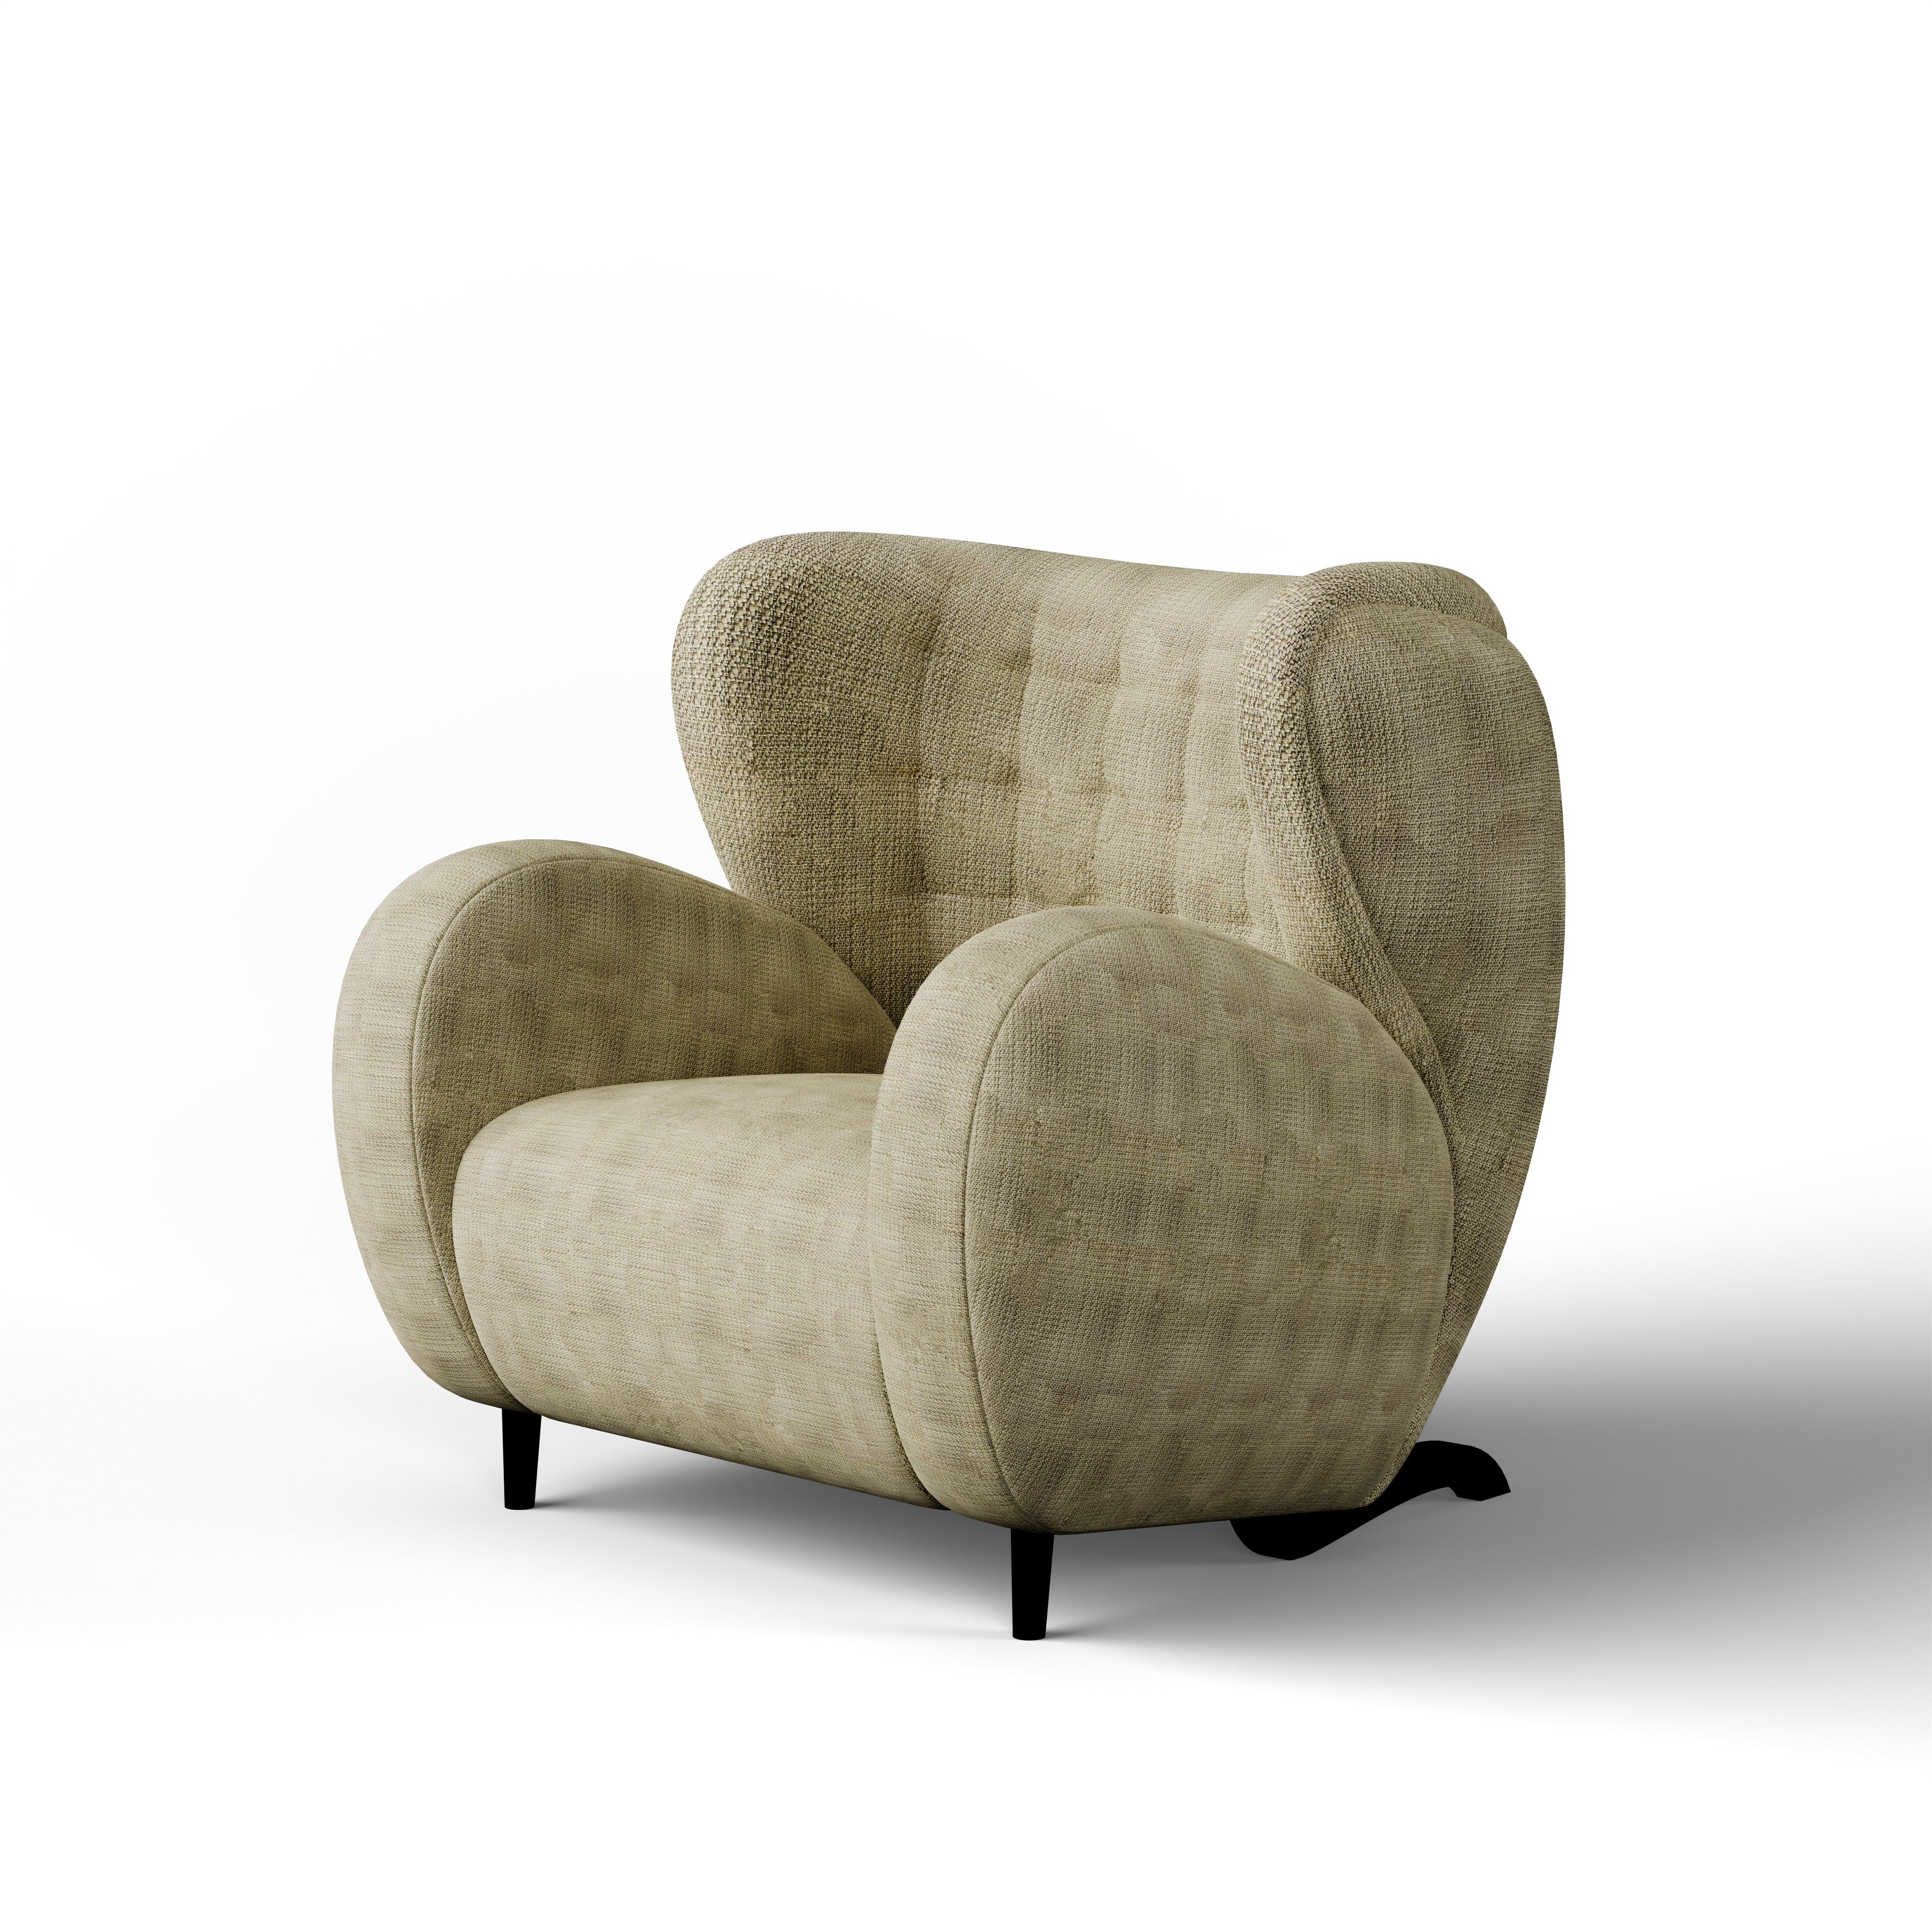 Hayesdale Accent Chair Available Online & In Store at Bridgeport, Ohio.